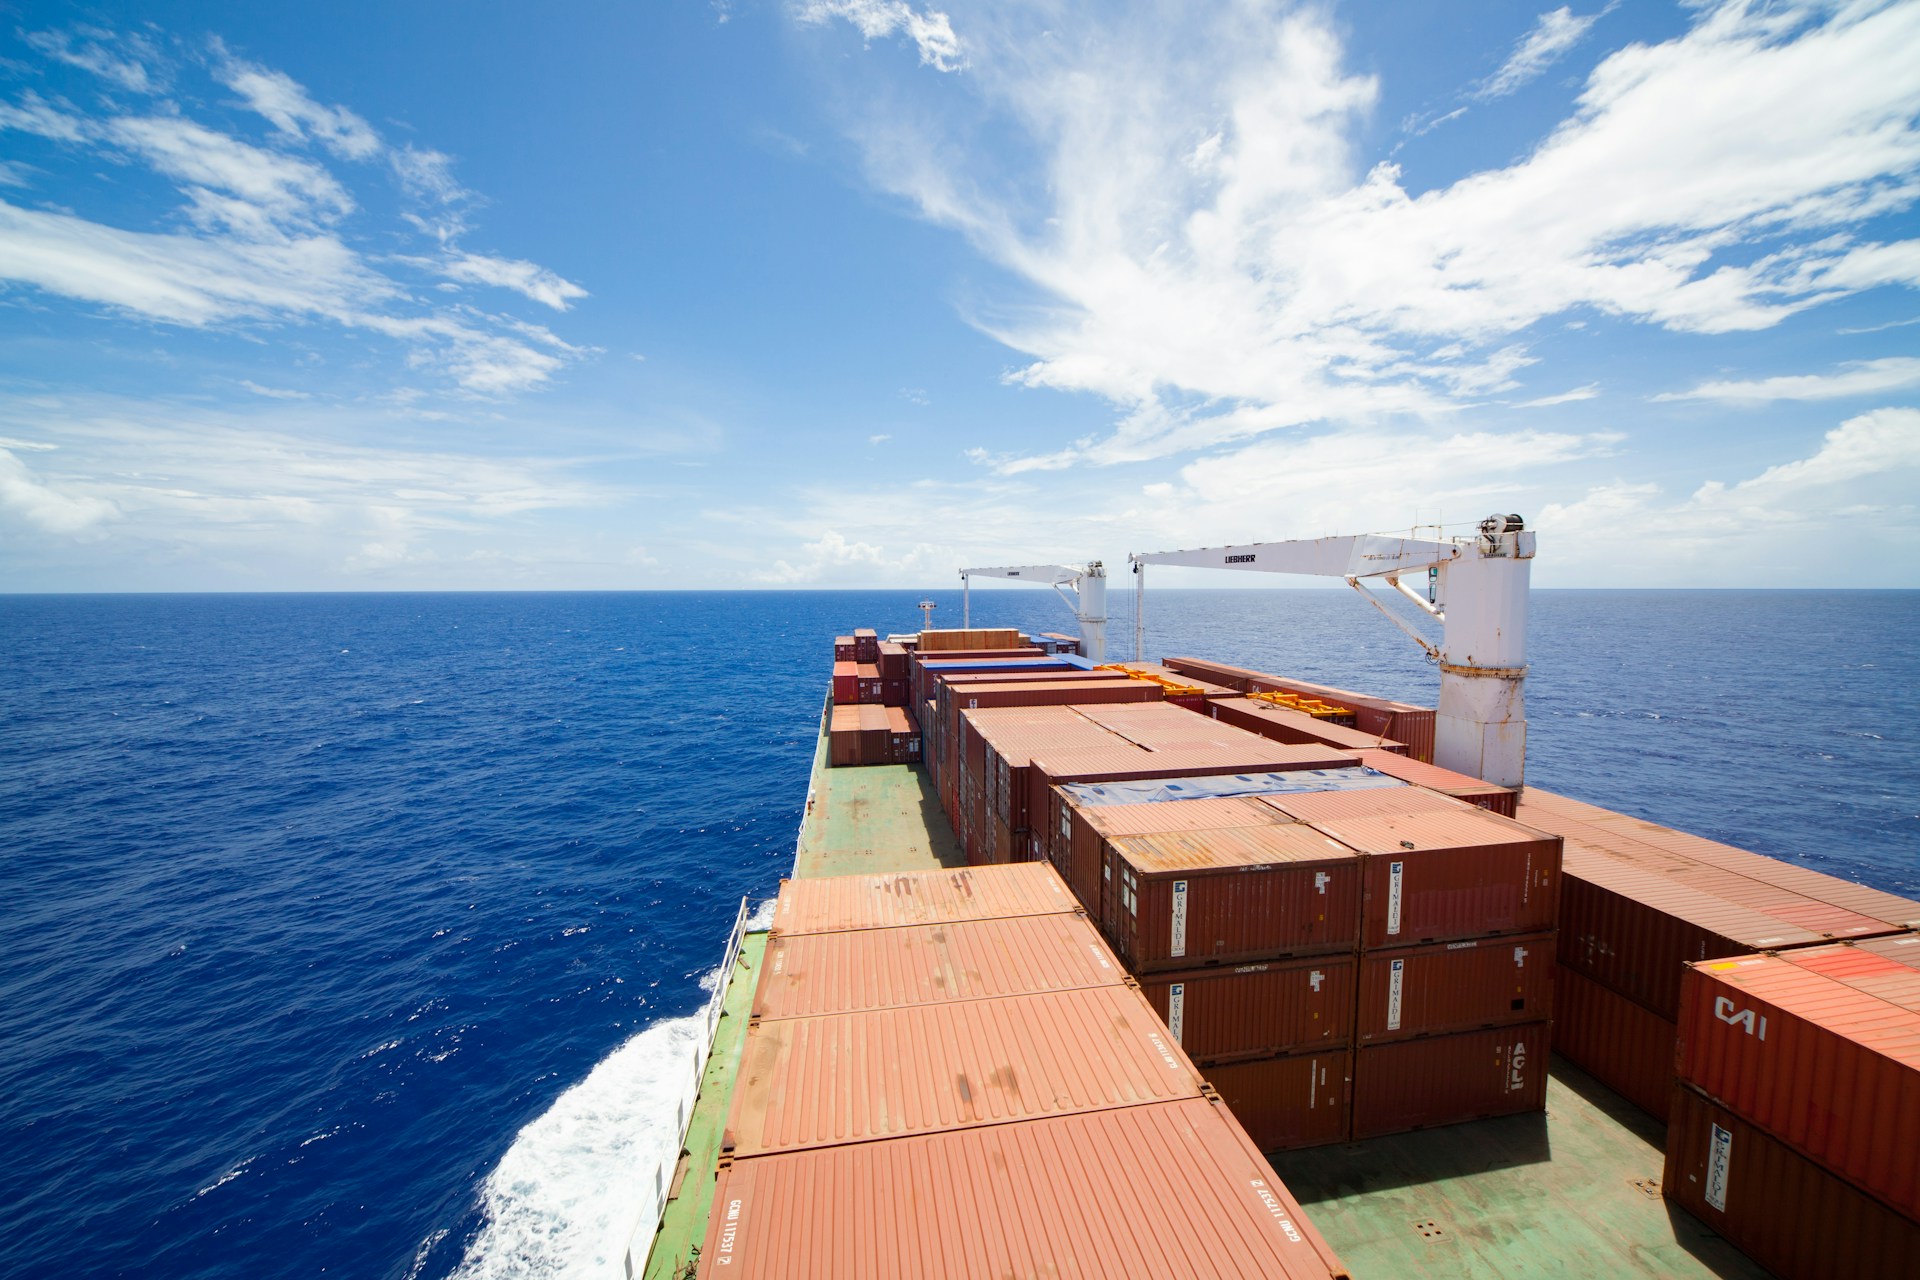 11% Rise in Seafarer Abandonments is “Unacceptable” Says ITF